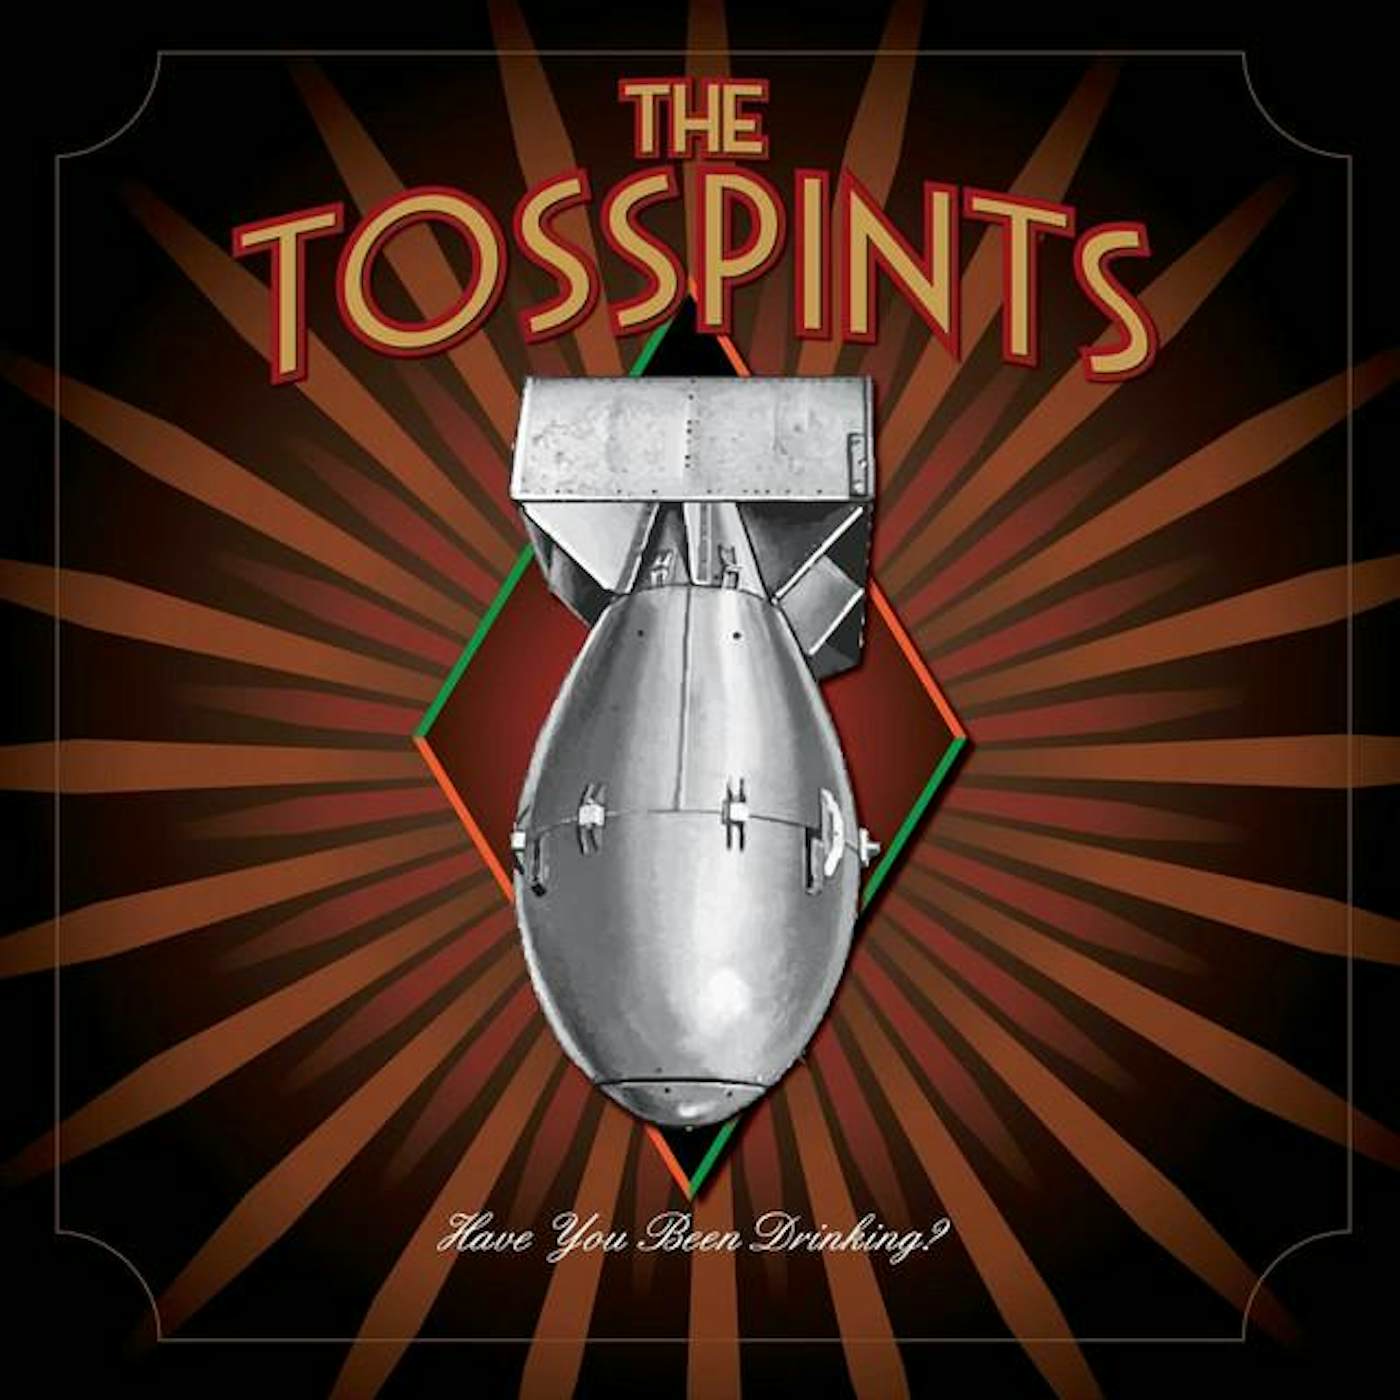 The Tosspints